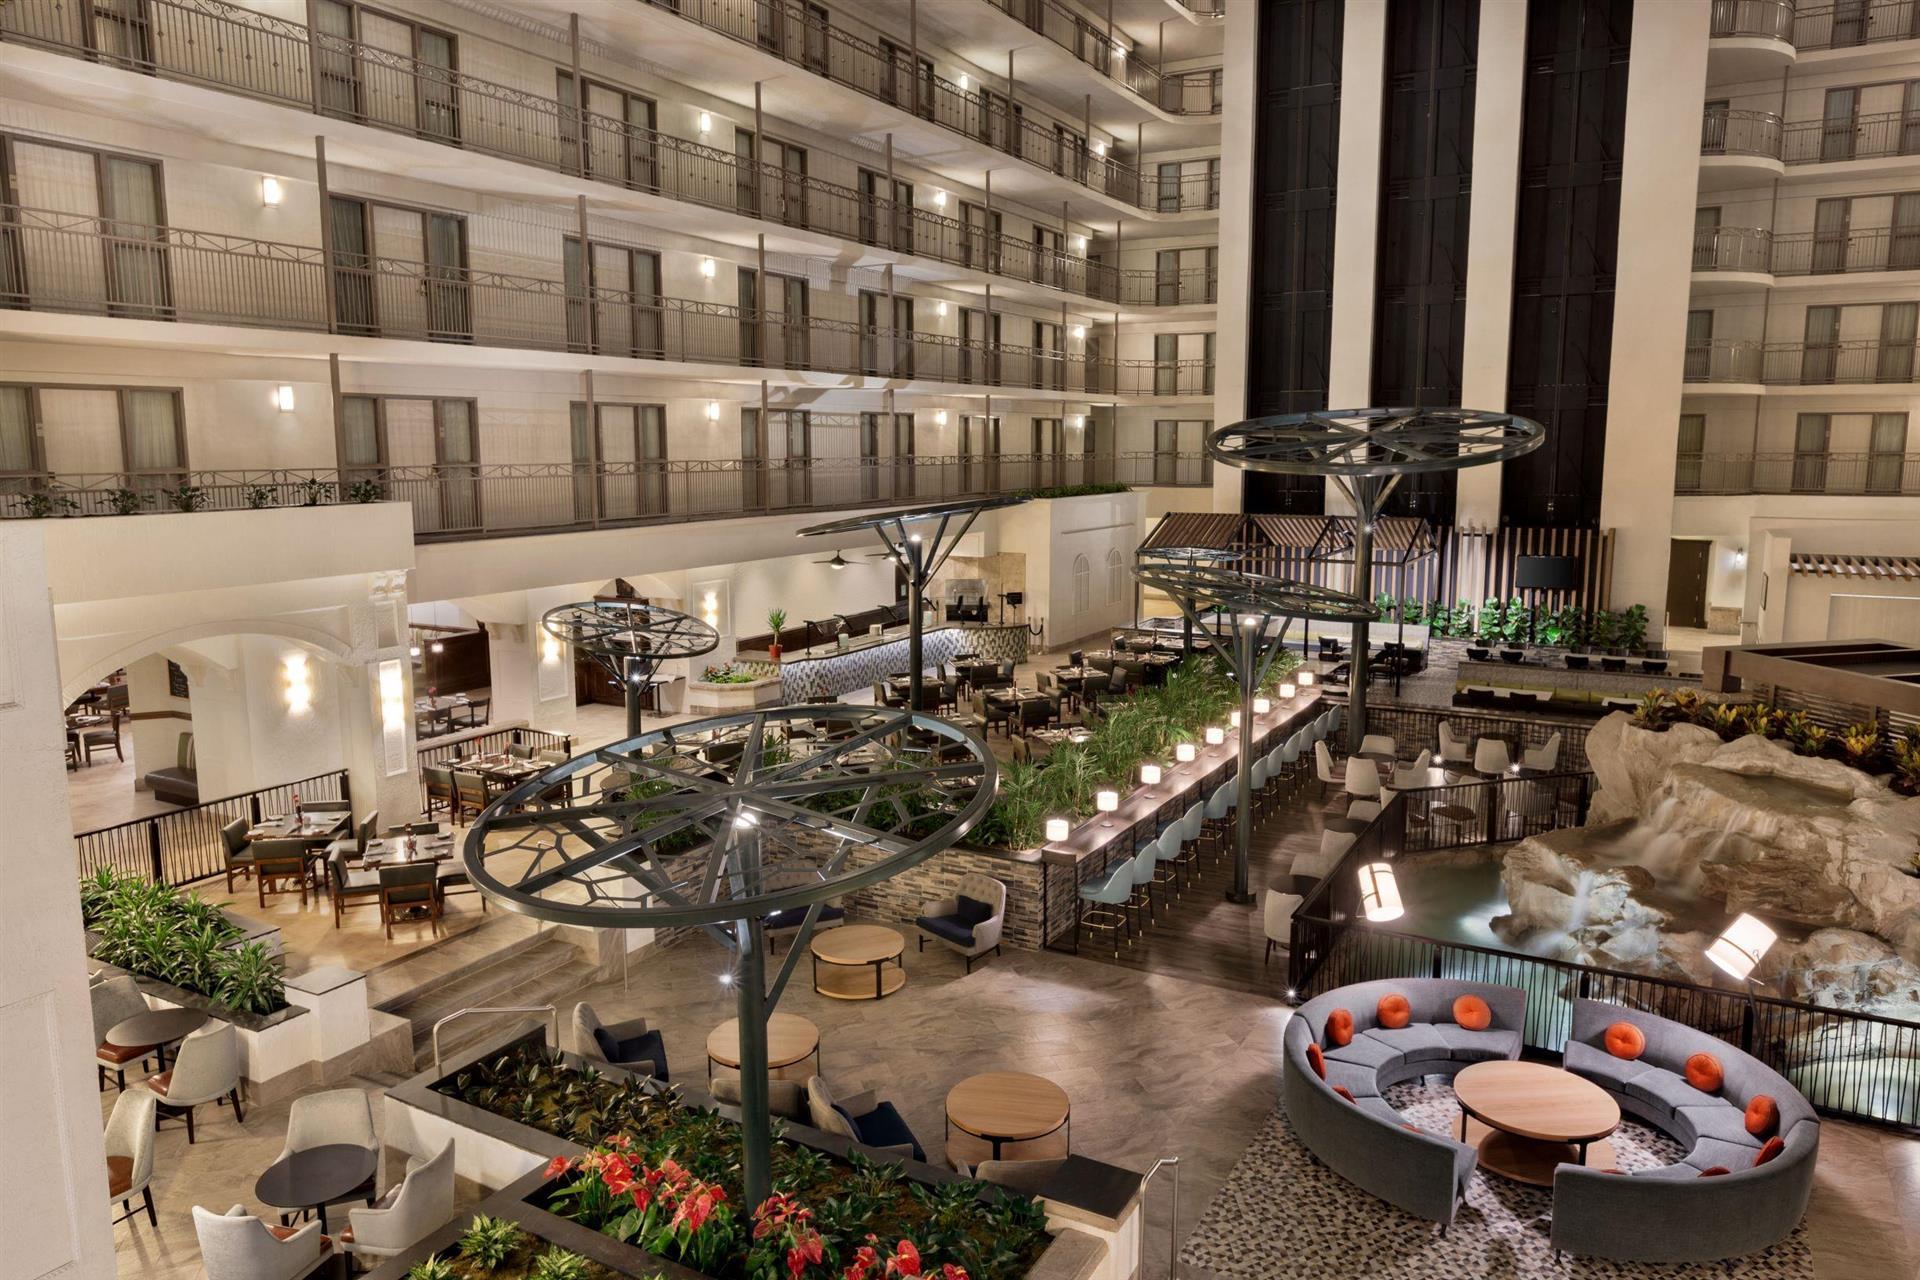 Embassy Suites by Hilton Dallas DFW Airport South in Irving, TX